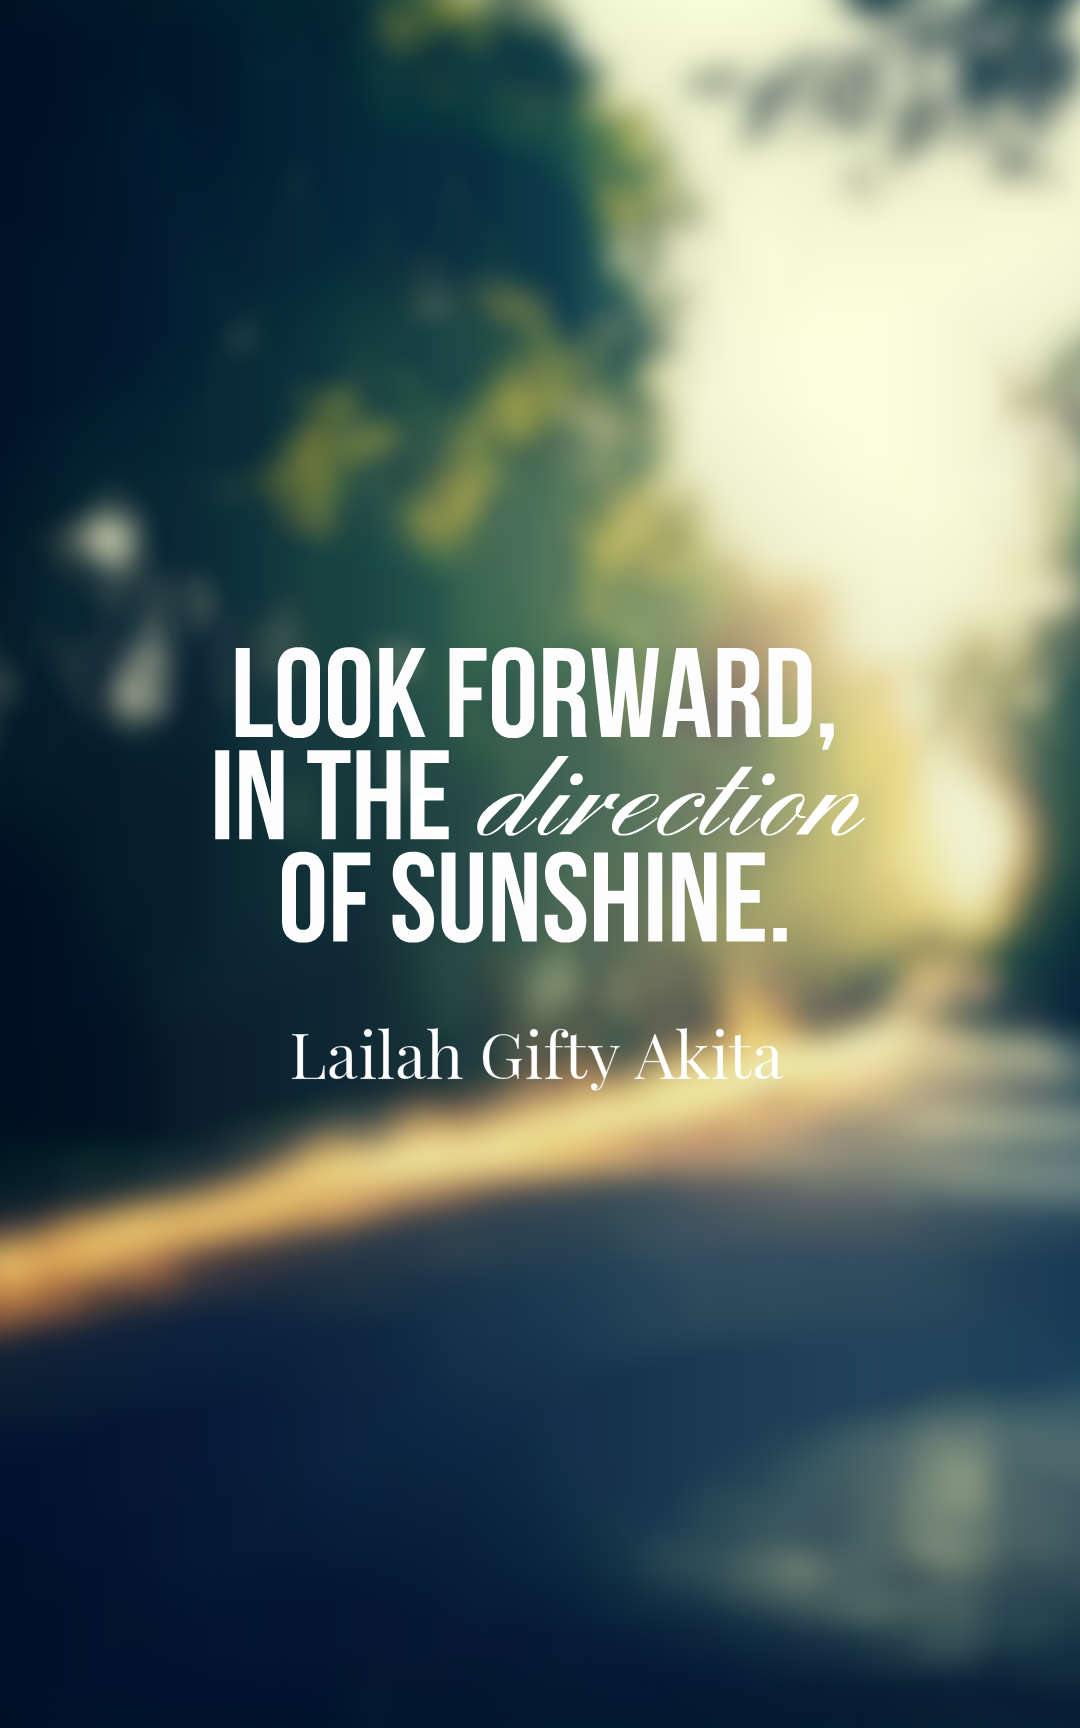 Look forward, in the direction of sunshine.